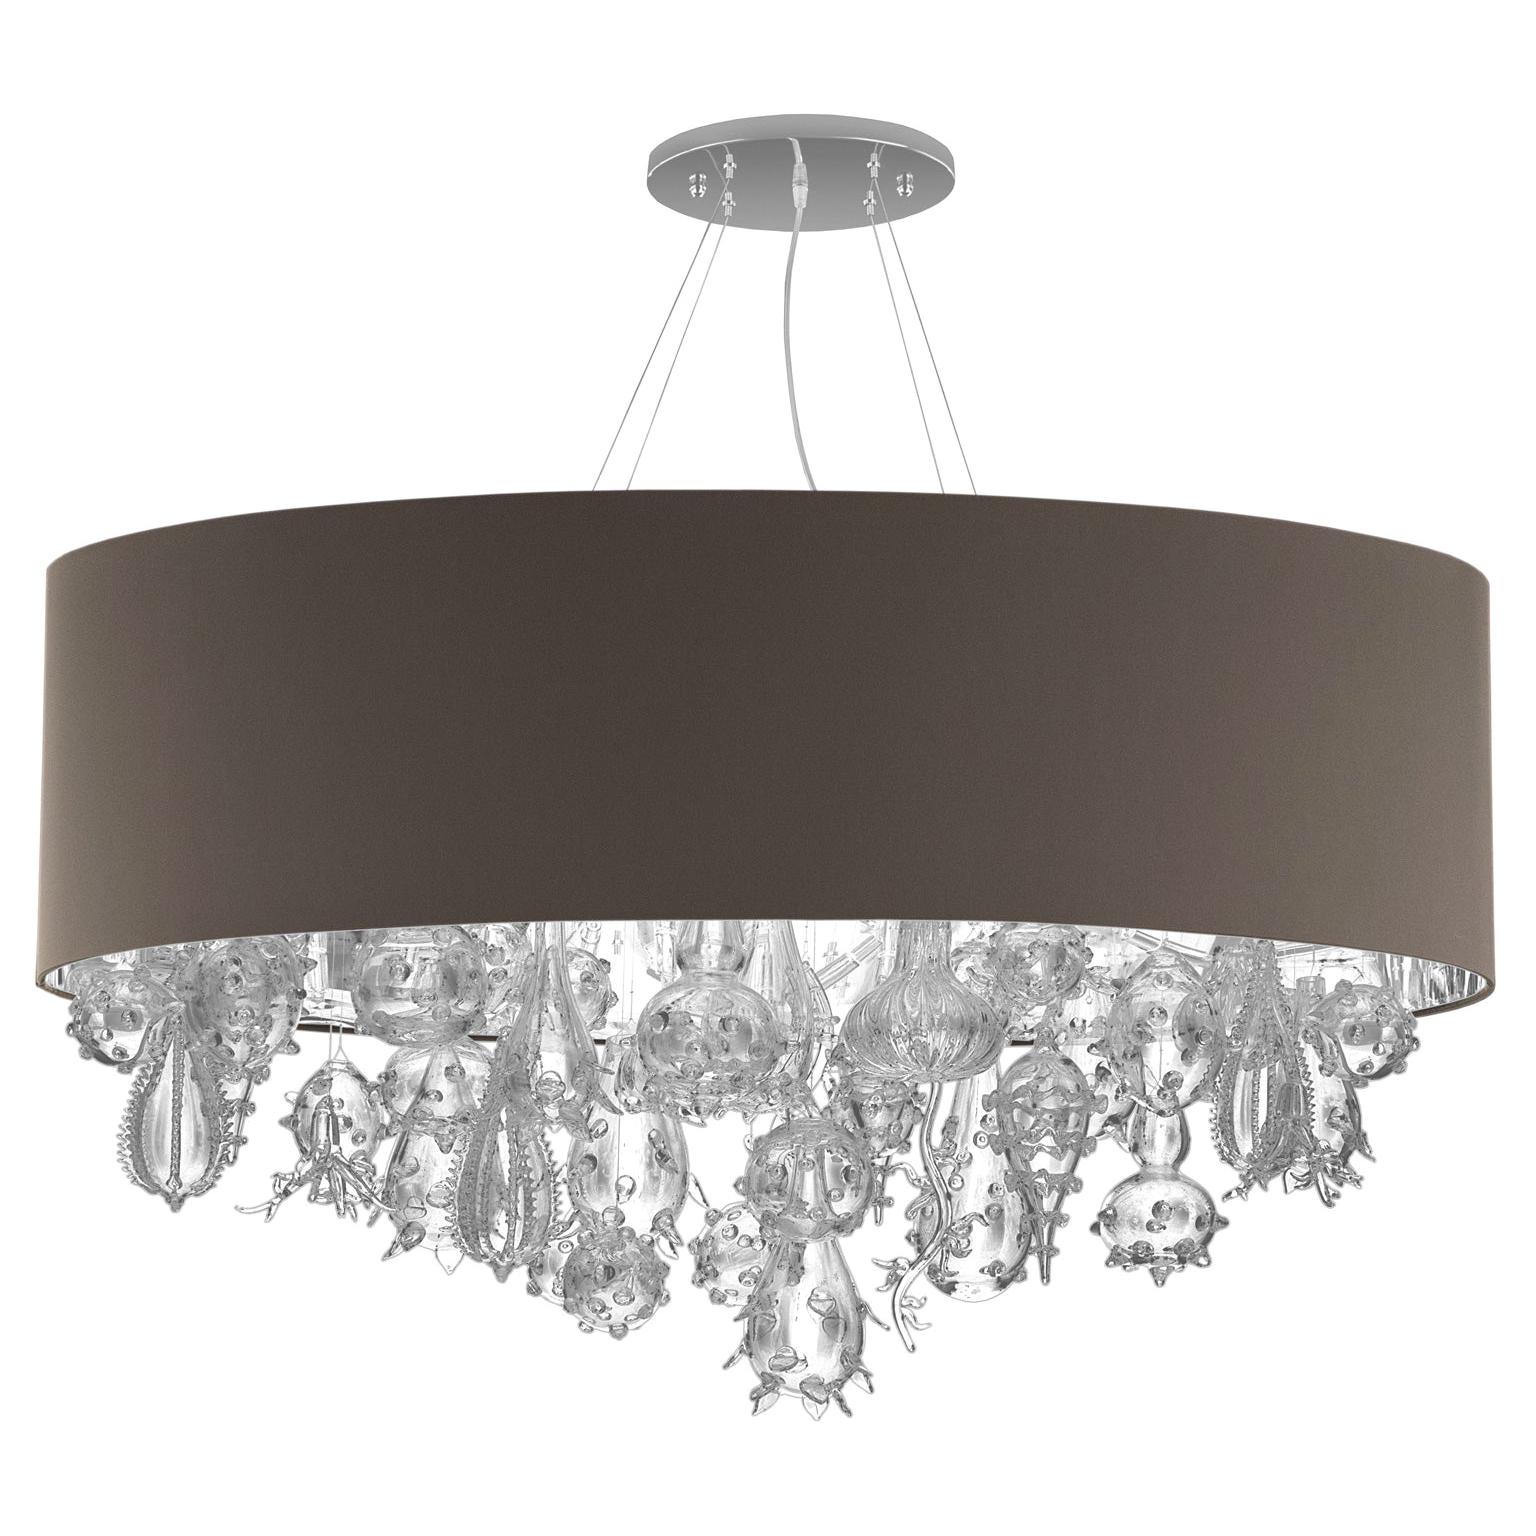 Artistic Suspension Cotton Lampshade multi Crystal Glass details by Multiforme